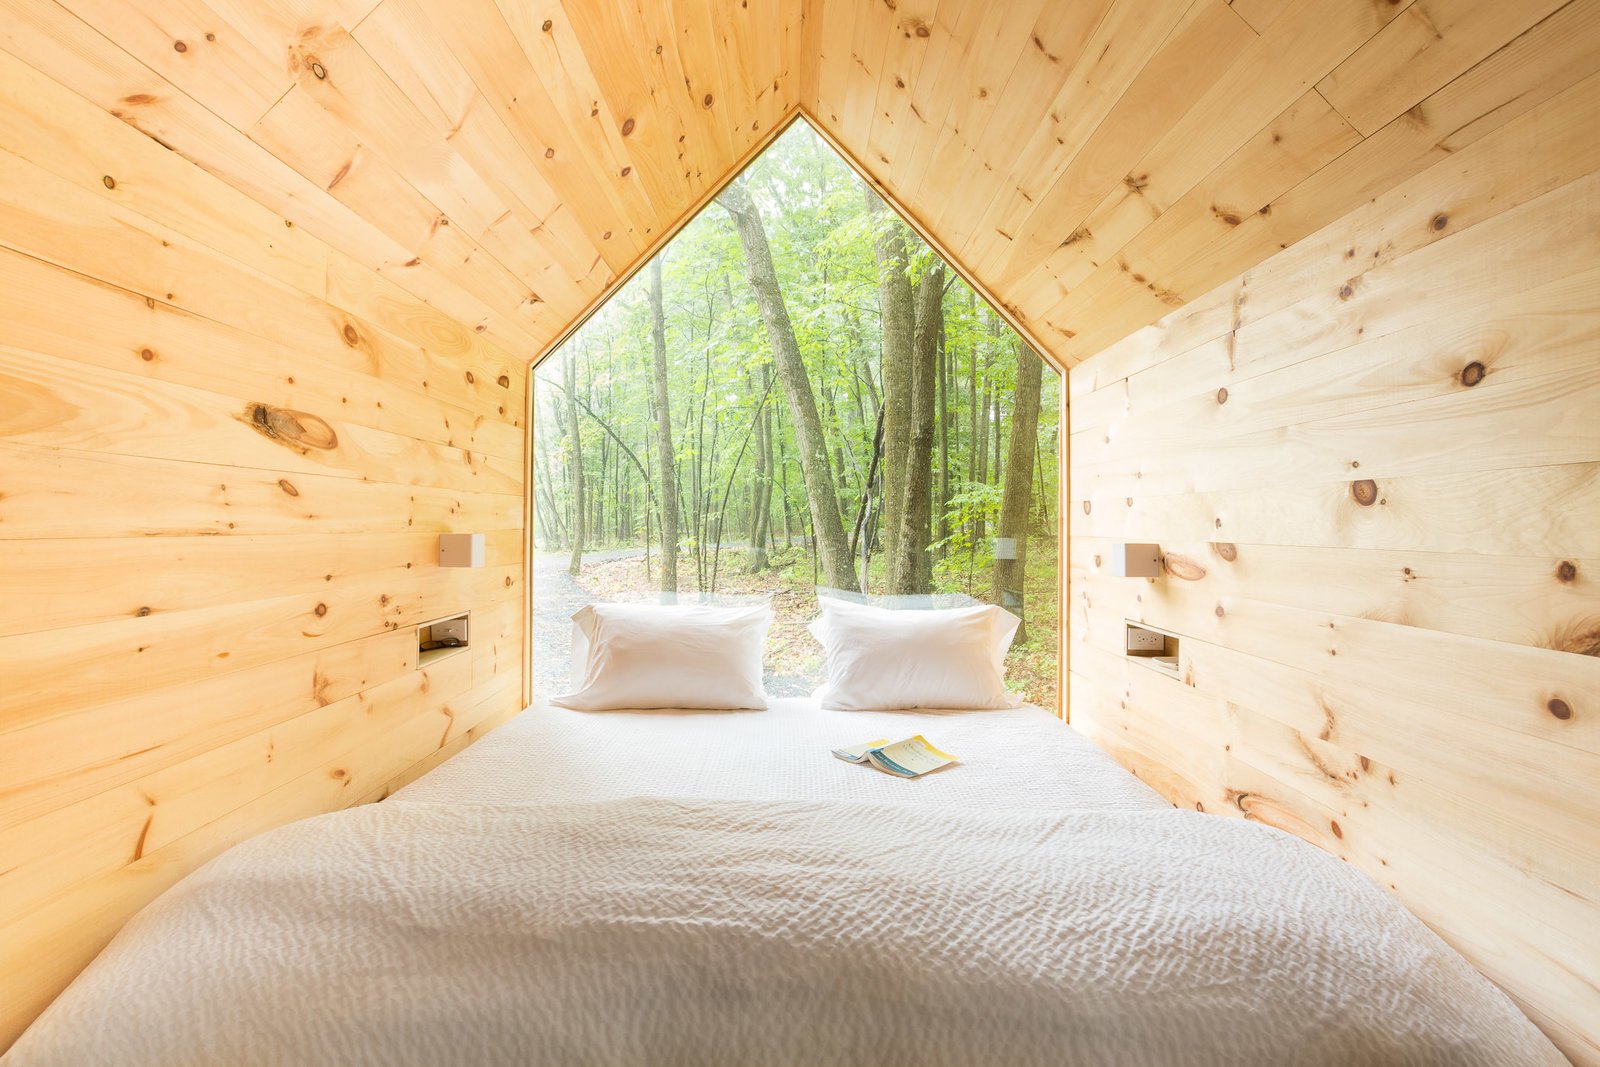 Inside the cabins, giant windows provide views of the lush tree canopy.